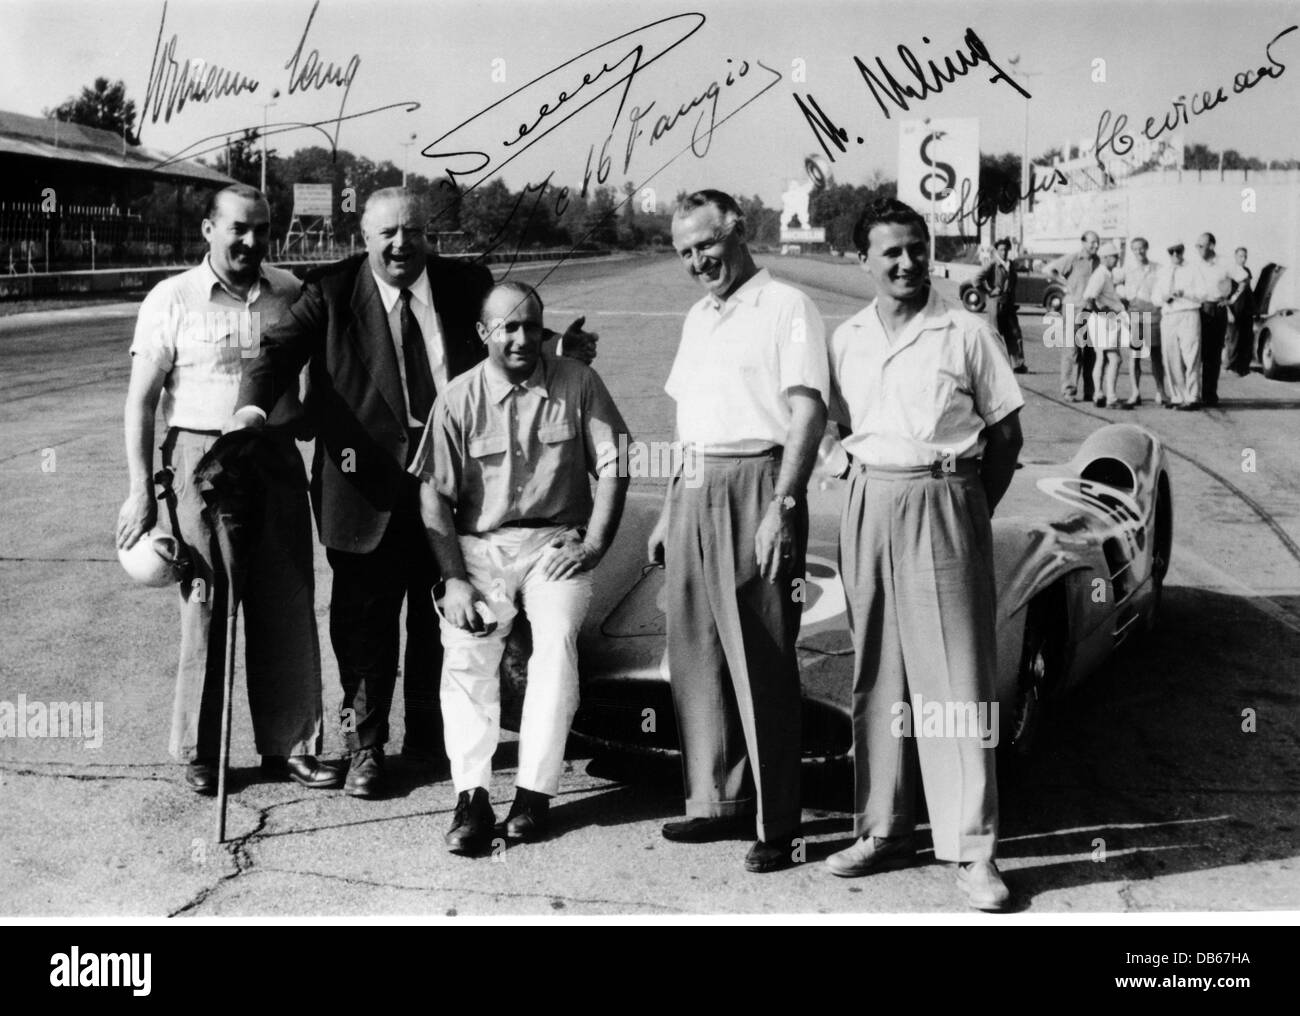 sport, car racing, Grand Prix of Italy 1954, the winning team of Mercedes-Benz: Hermann Lang, race director Alfred Neubauer, Juan Manuel Fangio, Karl Kling, Hans Herrmann, Monza, 5.9.1954, signatures, signature, autograph, autographs, Mercedes Benz, racing car, 20th century, historic, historical, people, 1950s, Additional-Rights-Clearences-Not Available Stock Photo